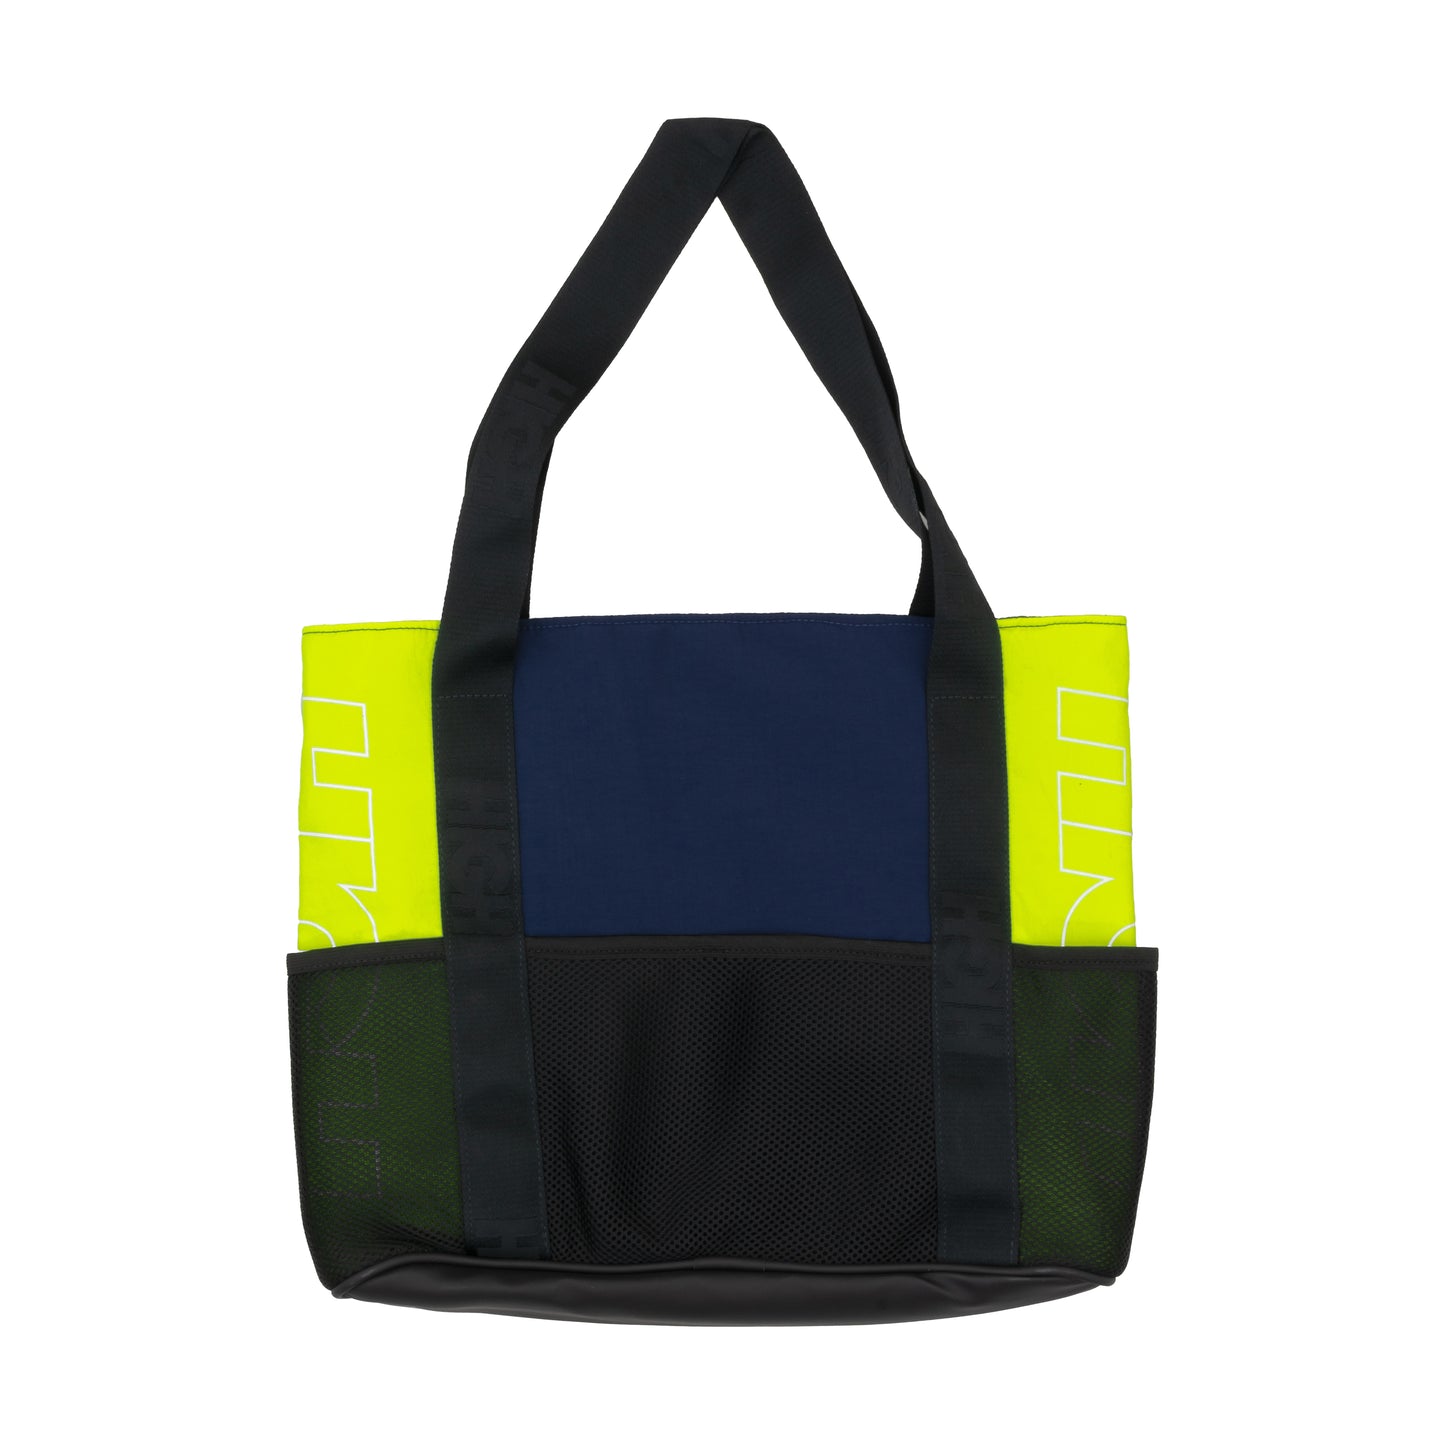 HIGH - Tote Bag Frontier Navy/Green